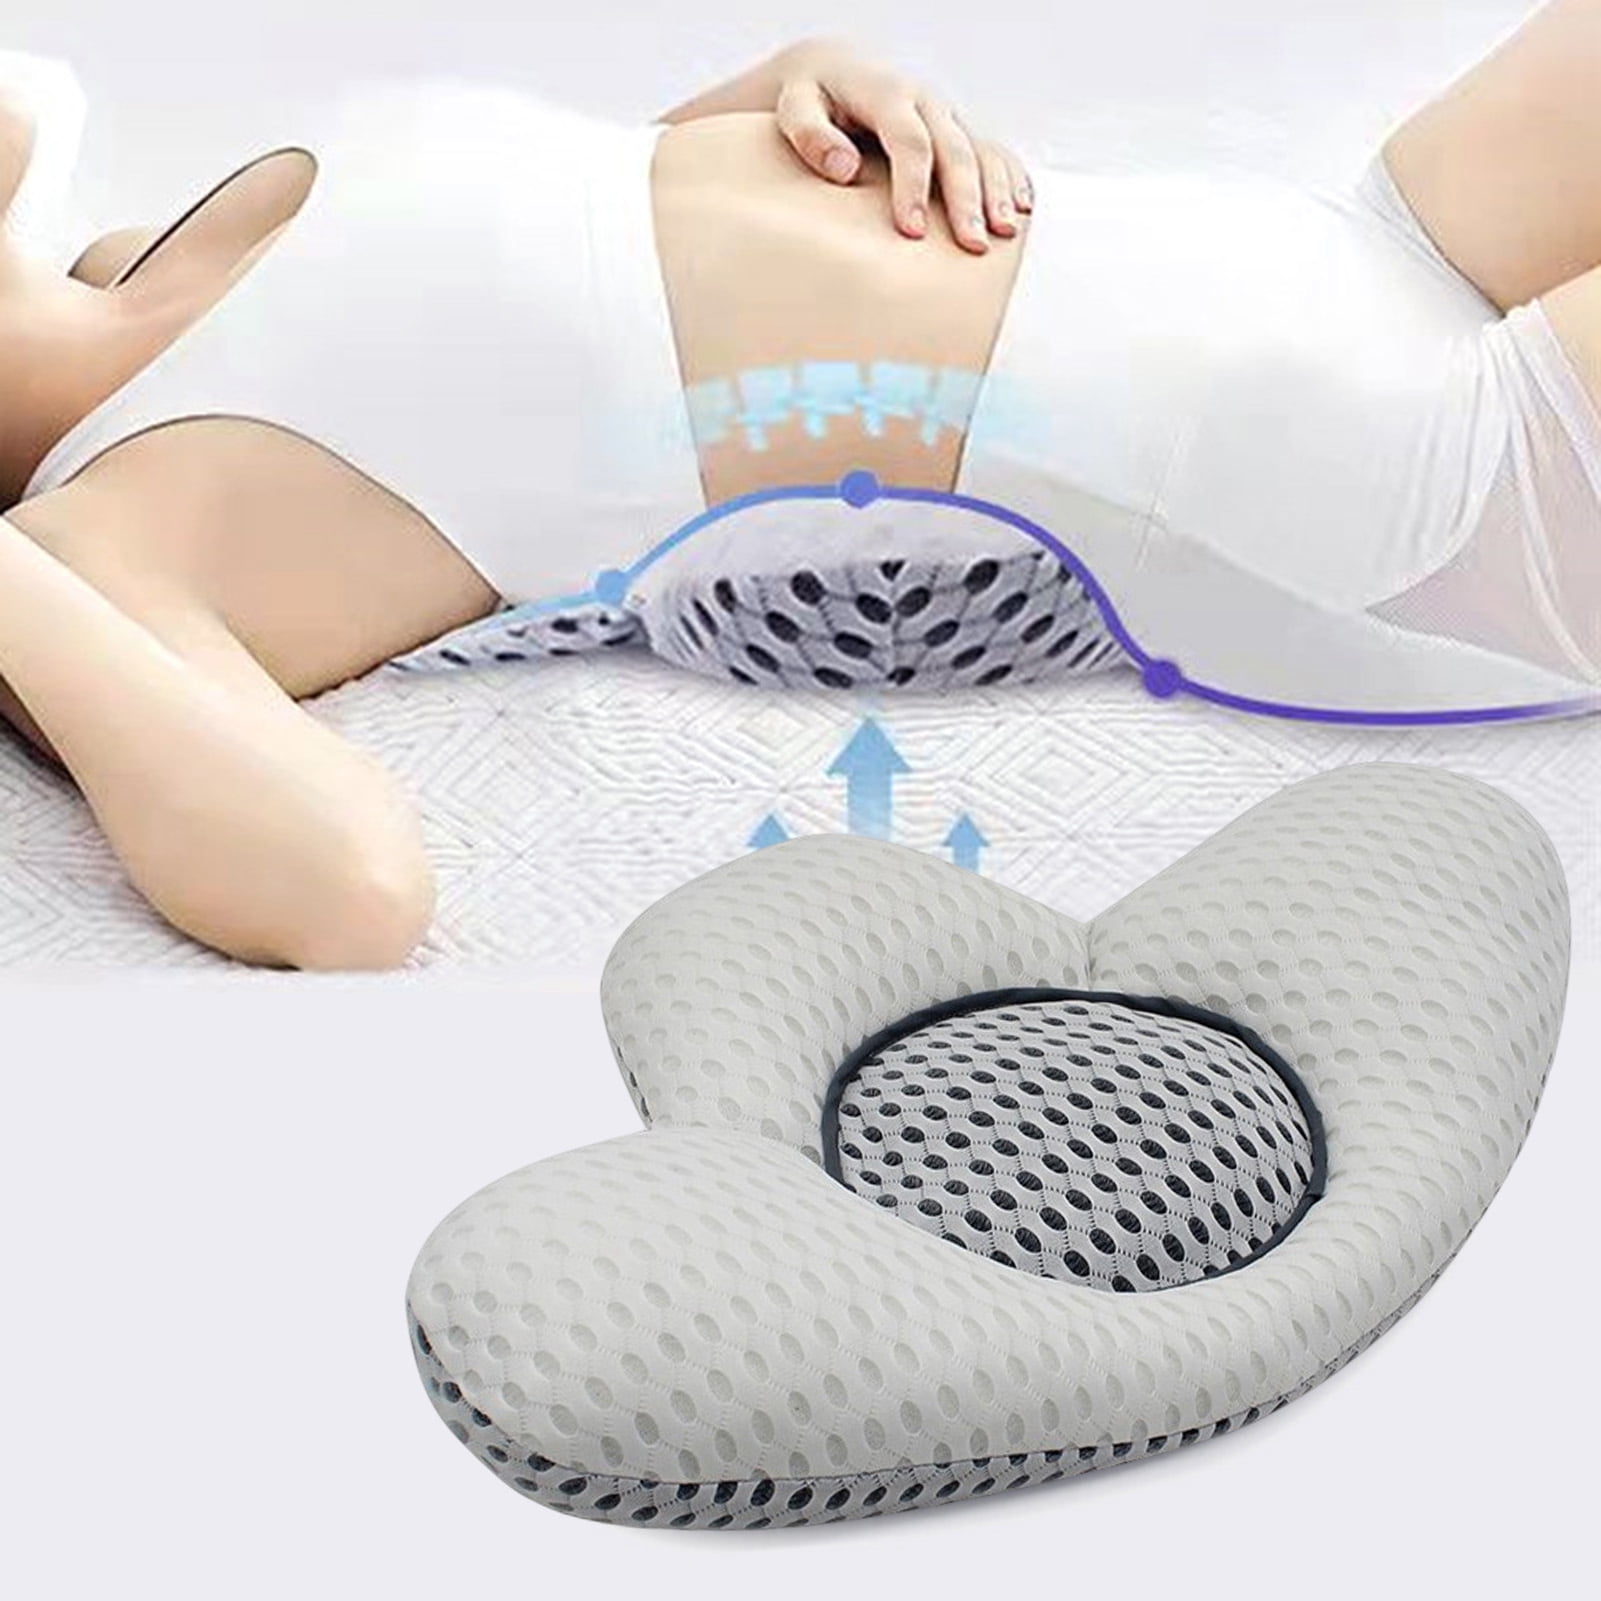 Lumbar Support Pillow For Sleeping, 3d Air Mesh Back Cushion For Bed,  Adjustable Height Lumbar Cushion For Lower Back Pain